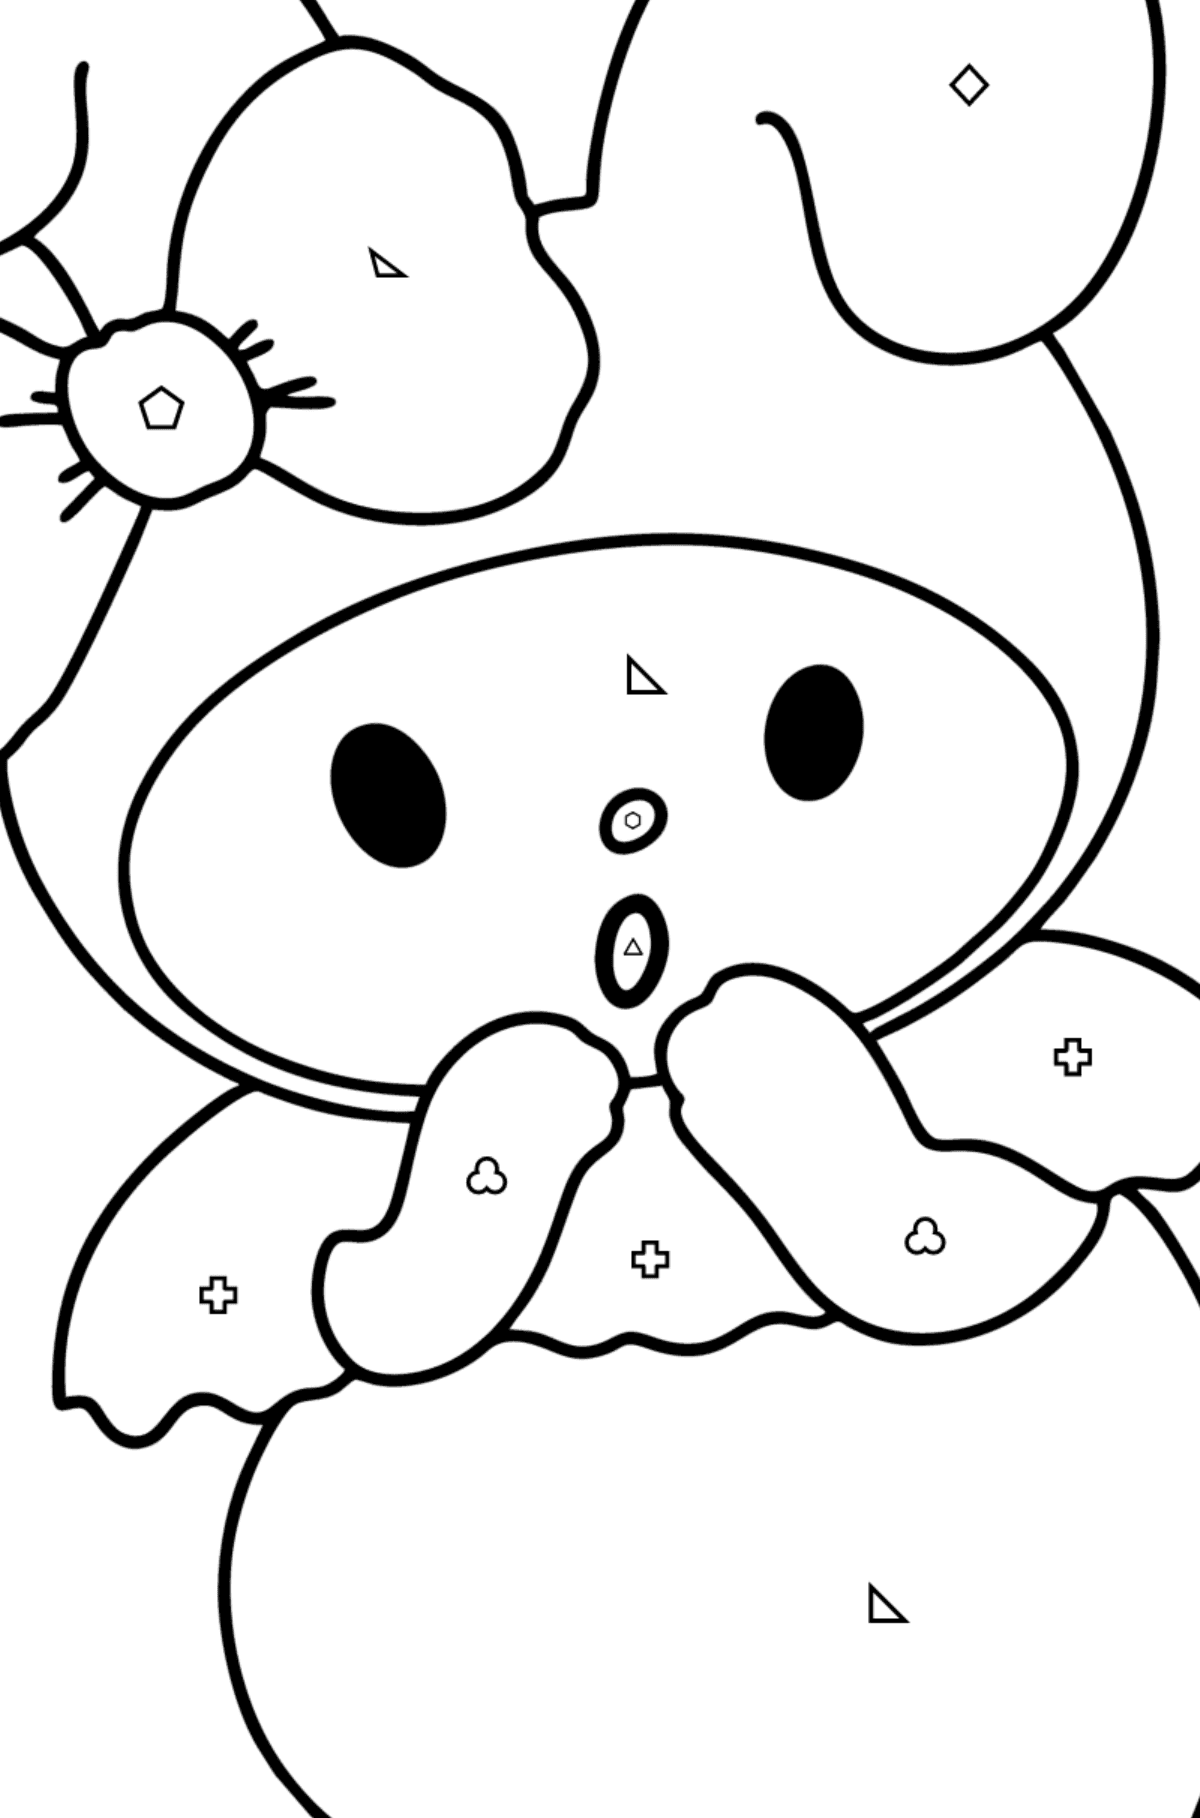 Hello Kitty My Melody coloring page - Coloring by Geometric Shapes for Kids